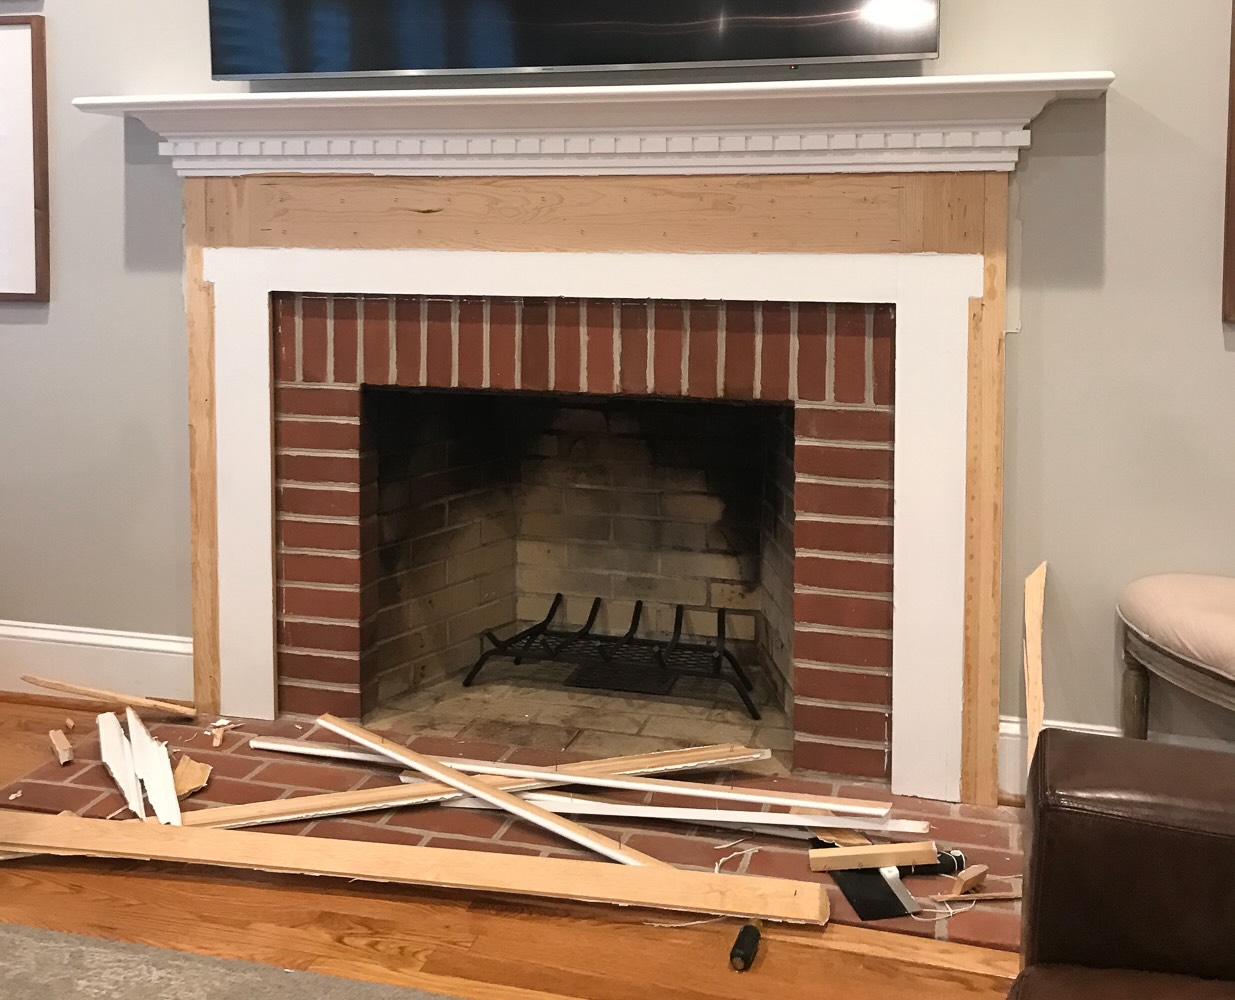 How To Tile Over Brick Fireplace